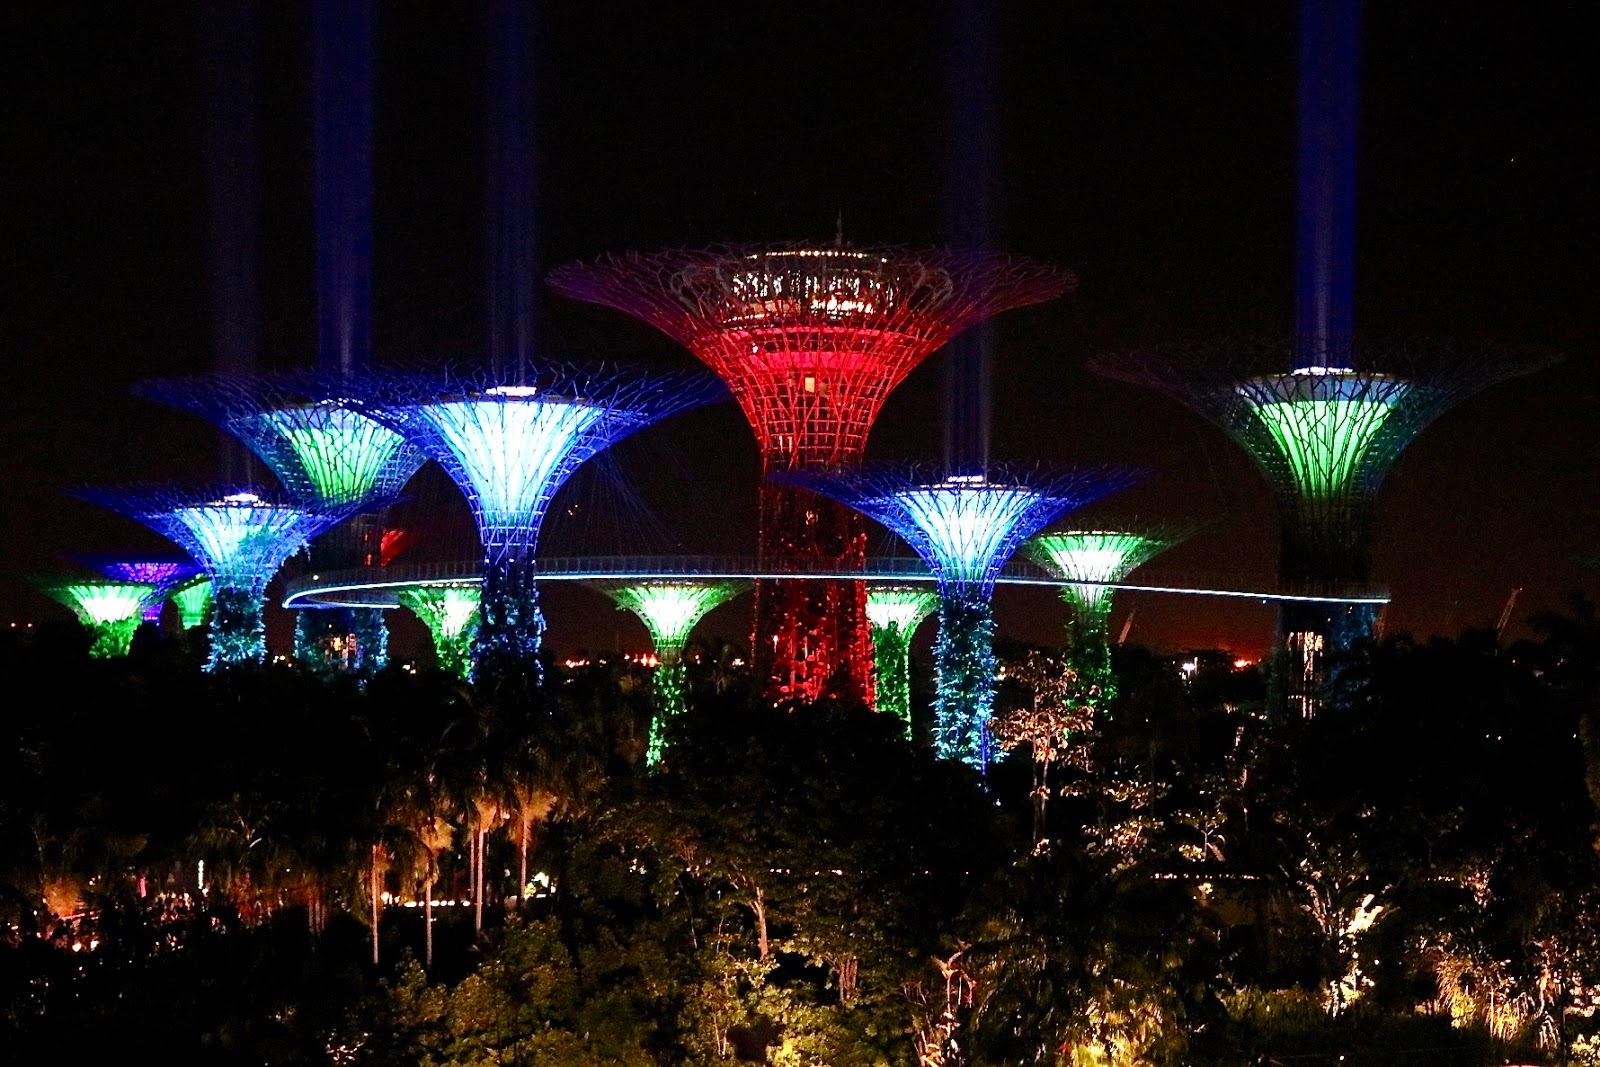 Star Wars Day (May 4th) at Gardens by The Bay, Singapore